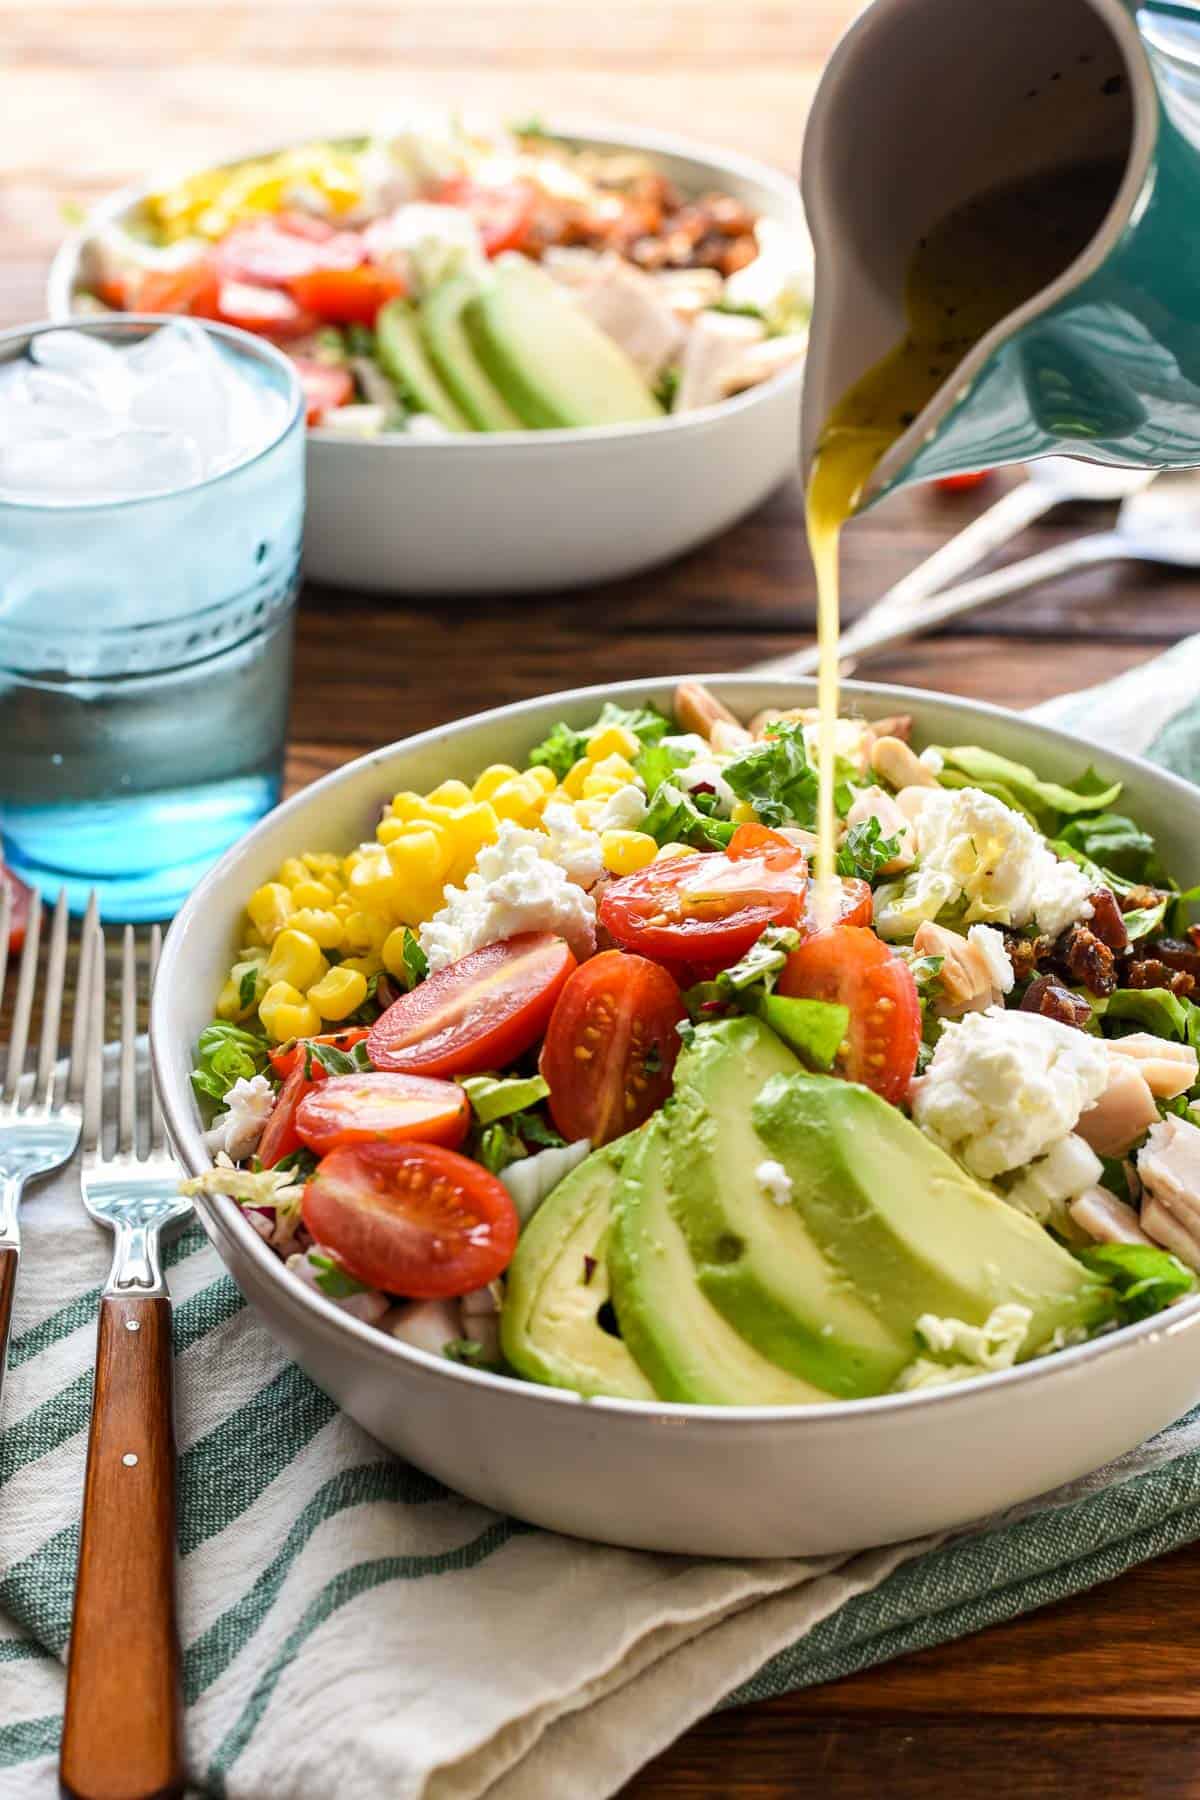 Say goodbye to boring salads and HELLO to this incredible Chopped Salad with Dates, Goat Cheese, and Avocado. 